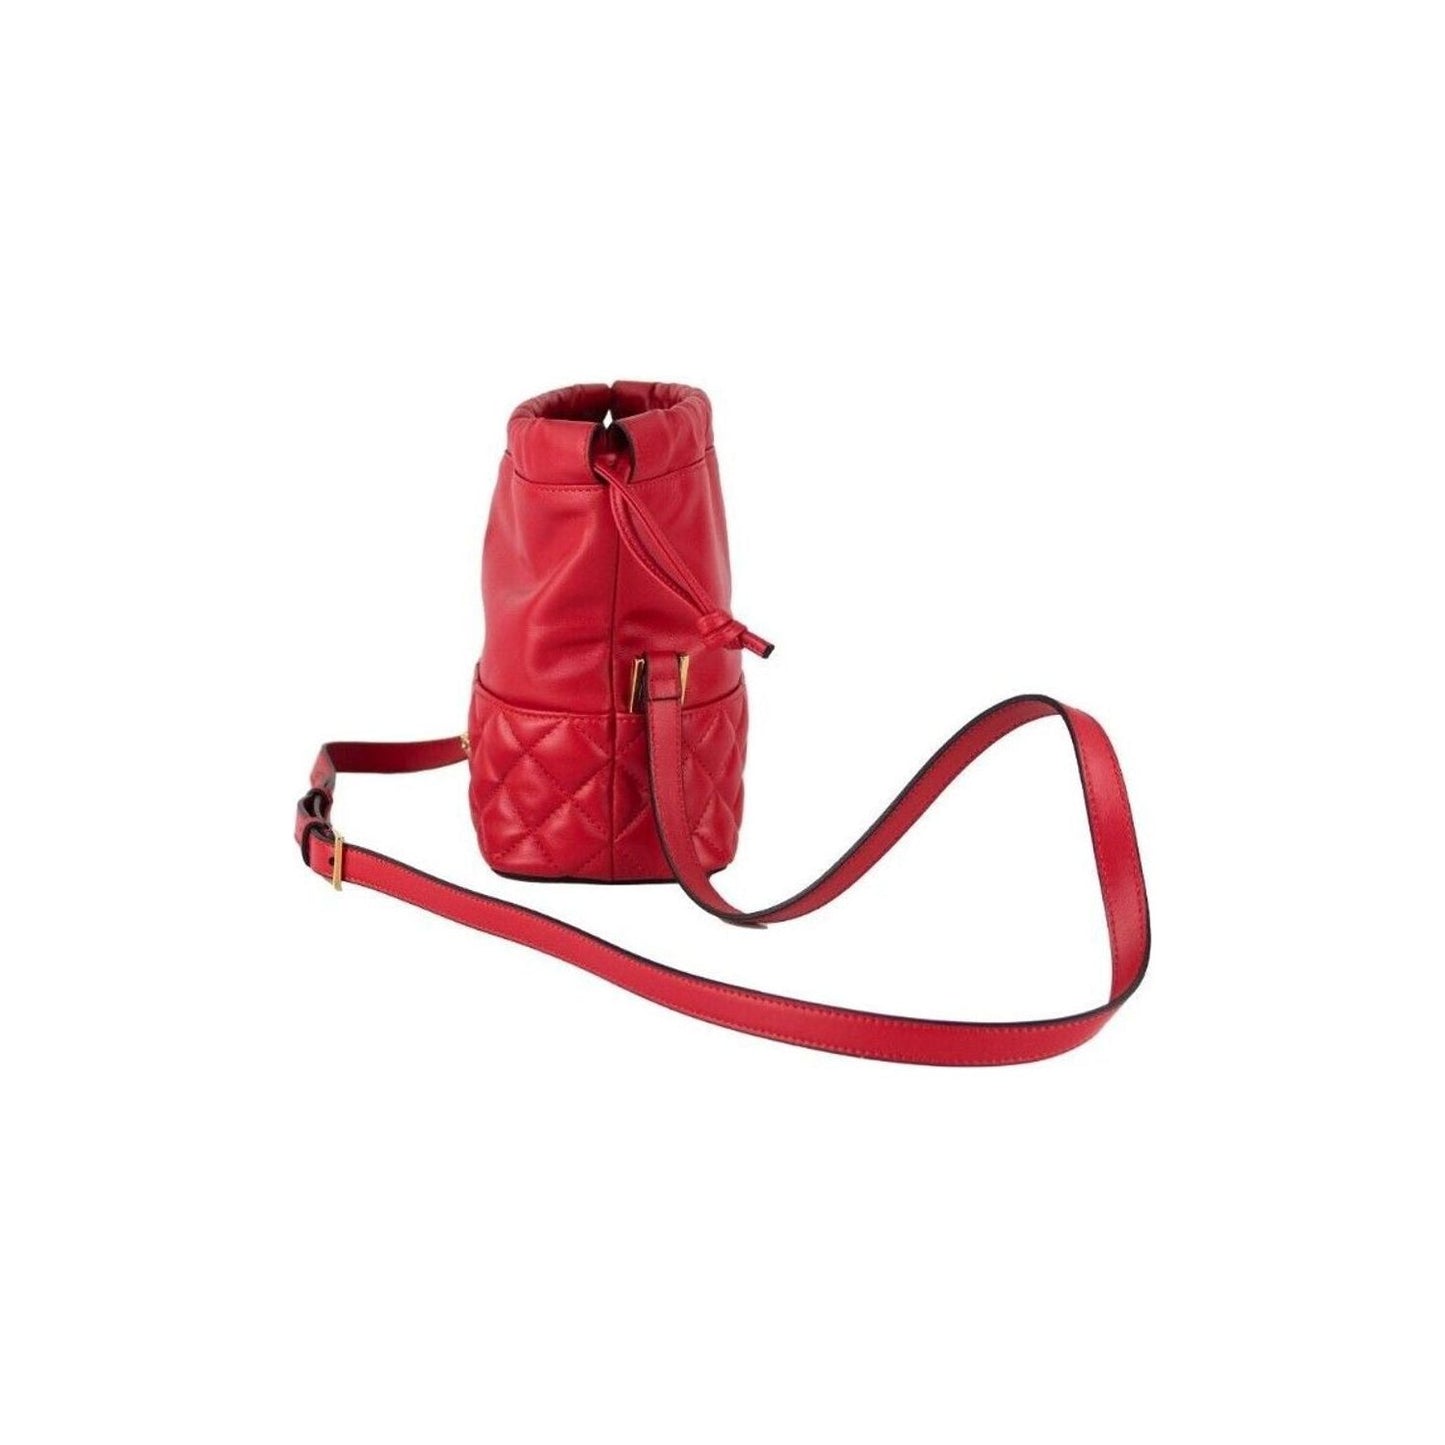 Versace Red Quilted Leather Drawstring Shoulder Bag Bucket Crossbody Handbag red-quilted-leather-drawstring-shoulder-bag-bucket-crossbody-handbag